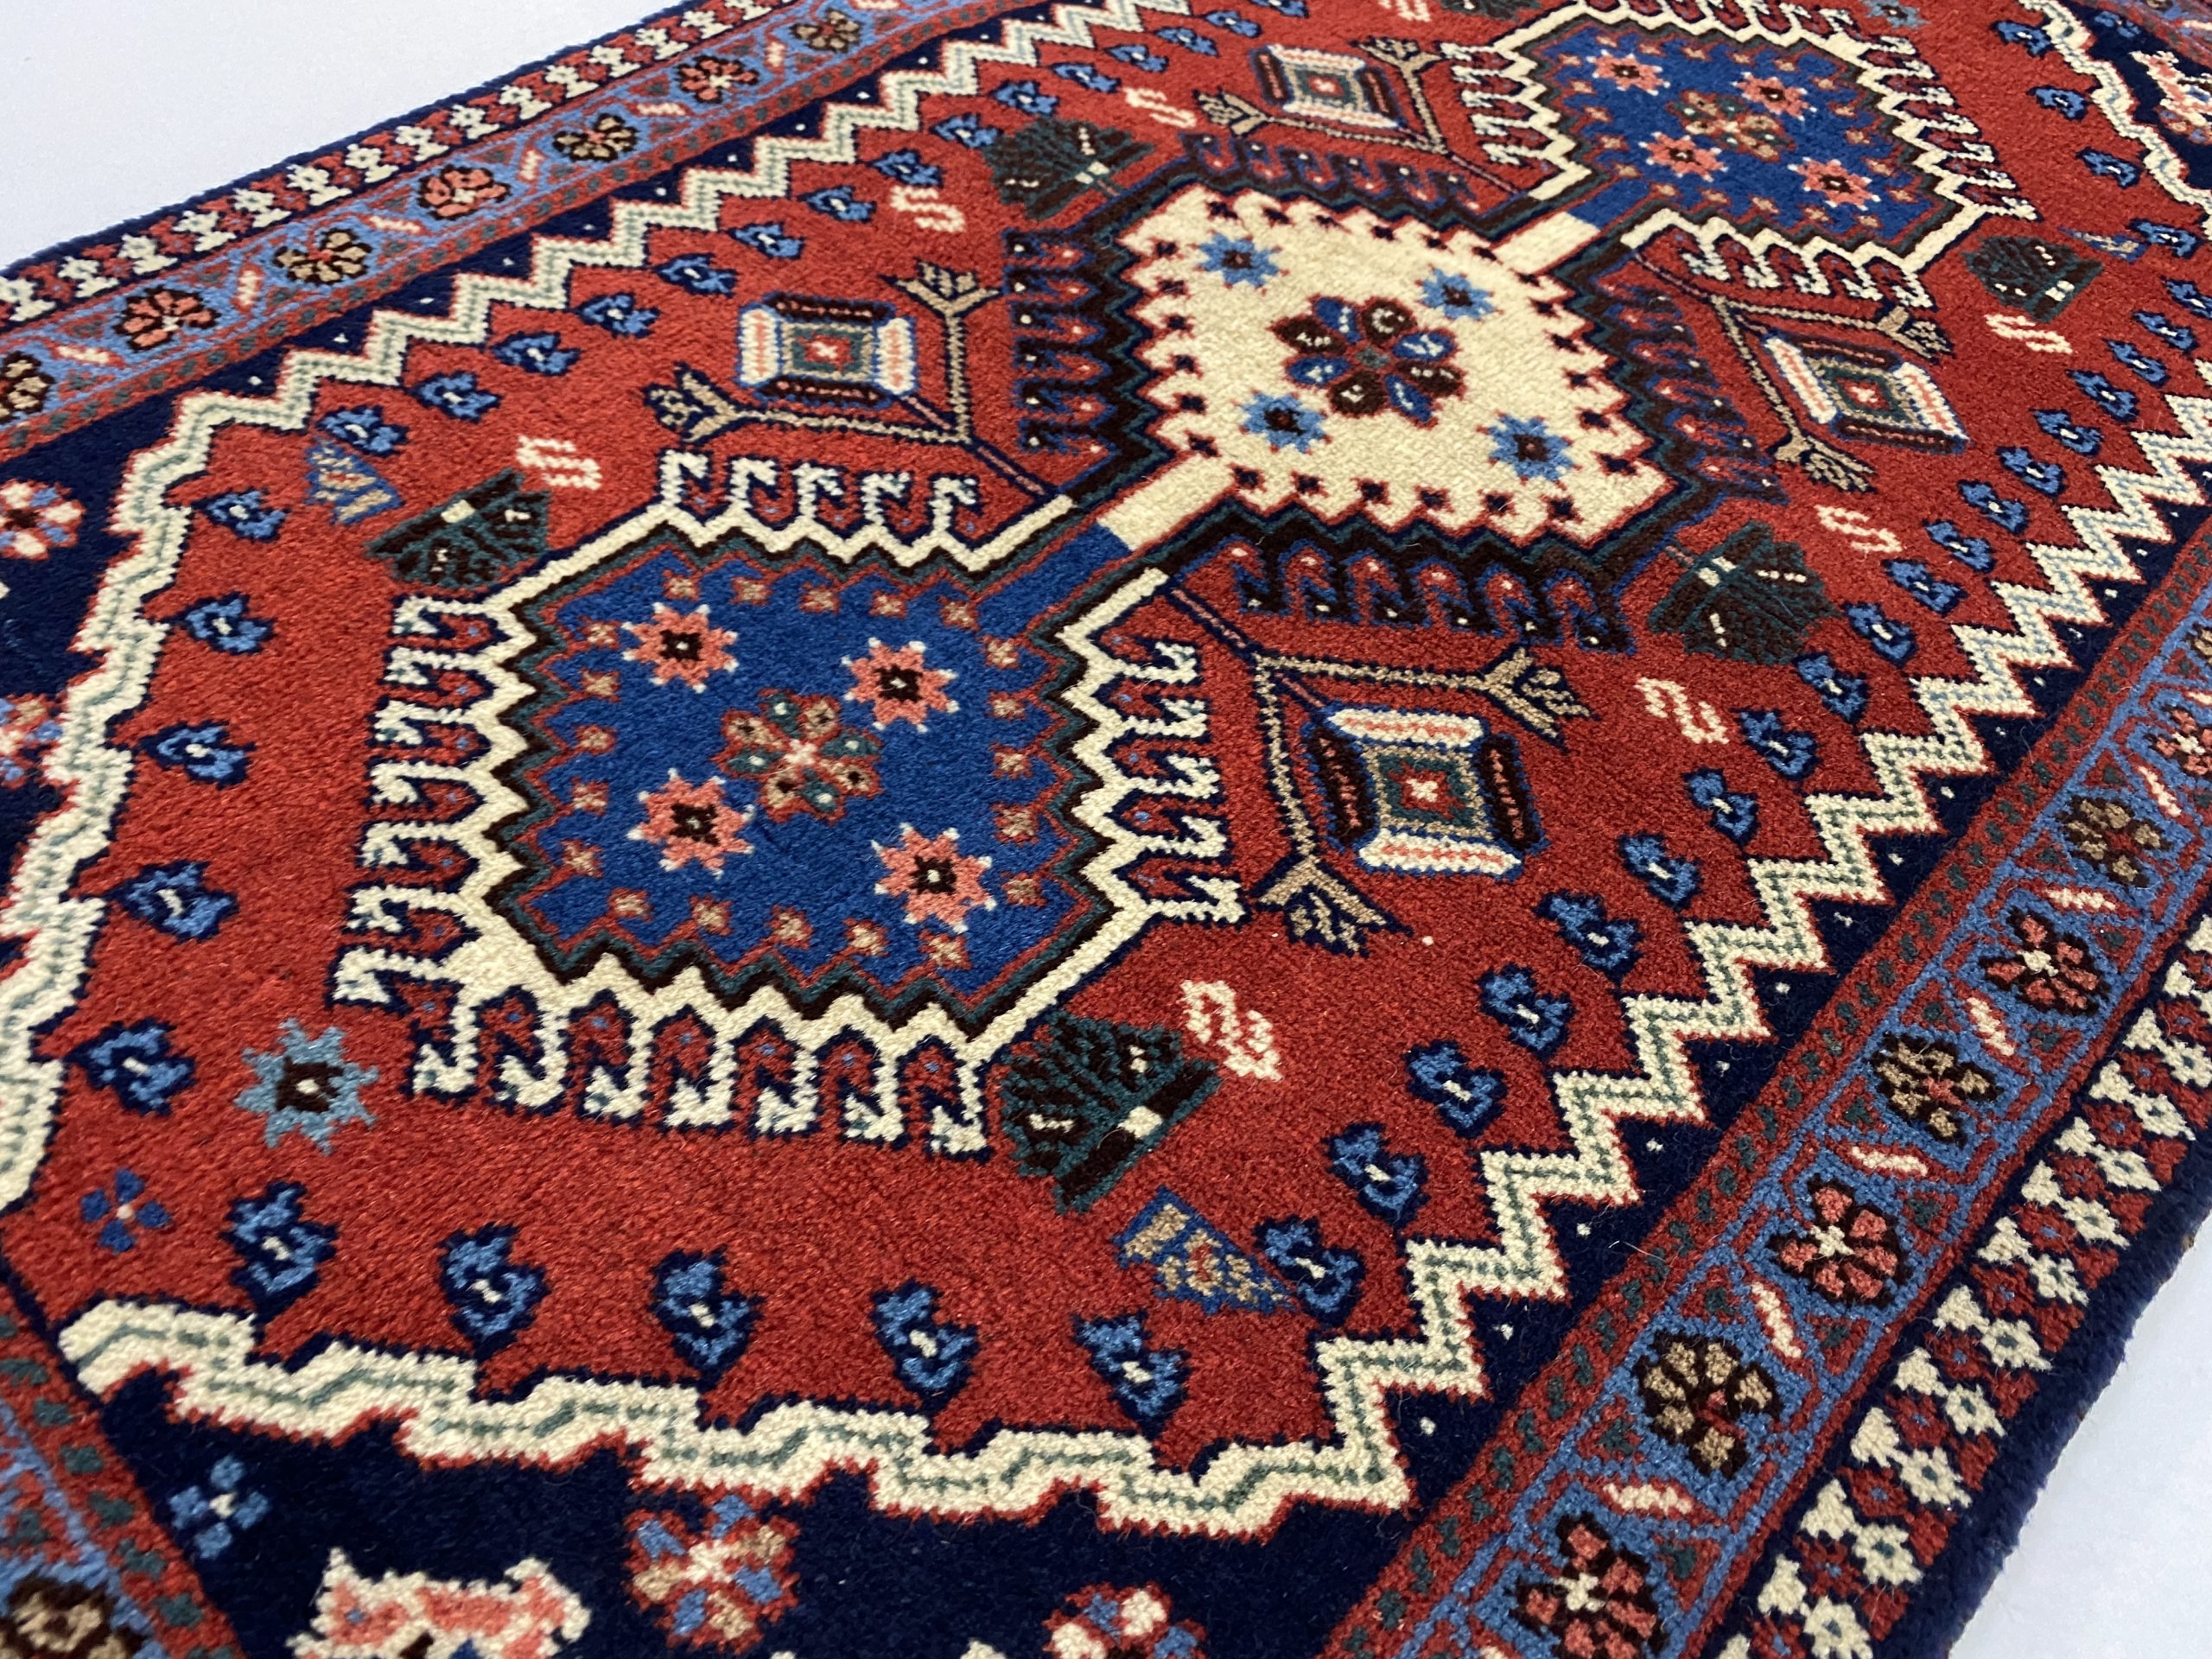 Rug# 10084, Aliabad Yalameh, vegtable dyes, Qashqai weave, south Persia, size 97x58 cm (3)